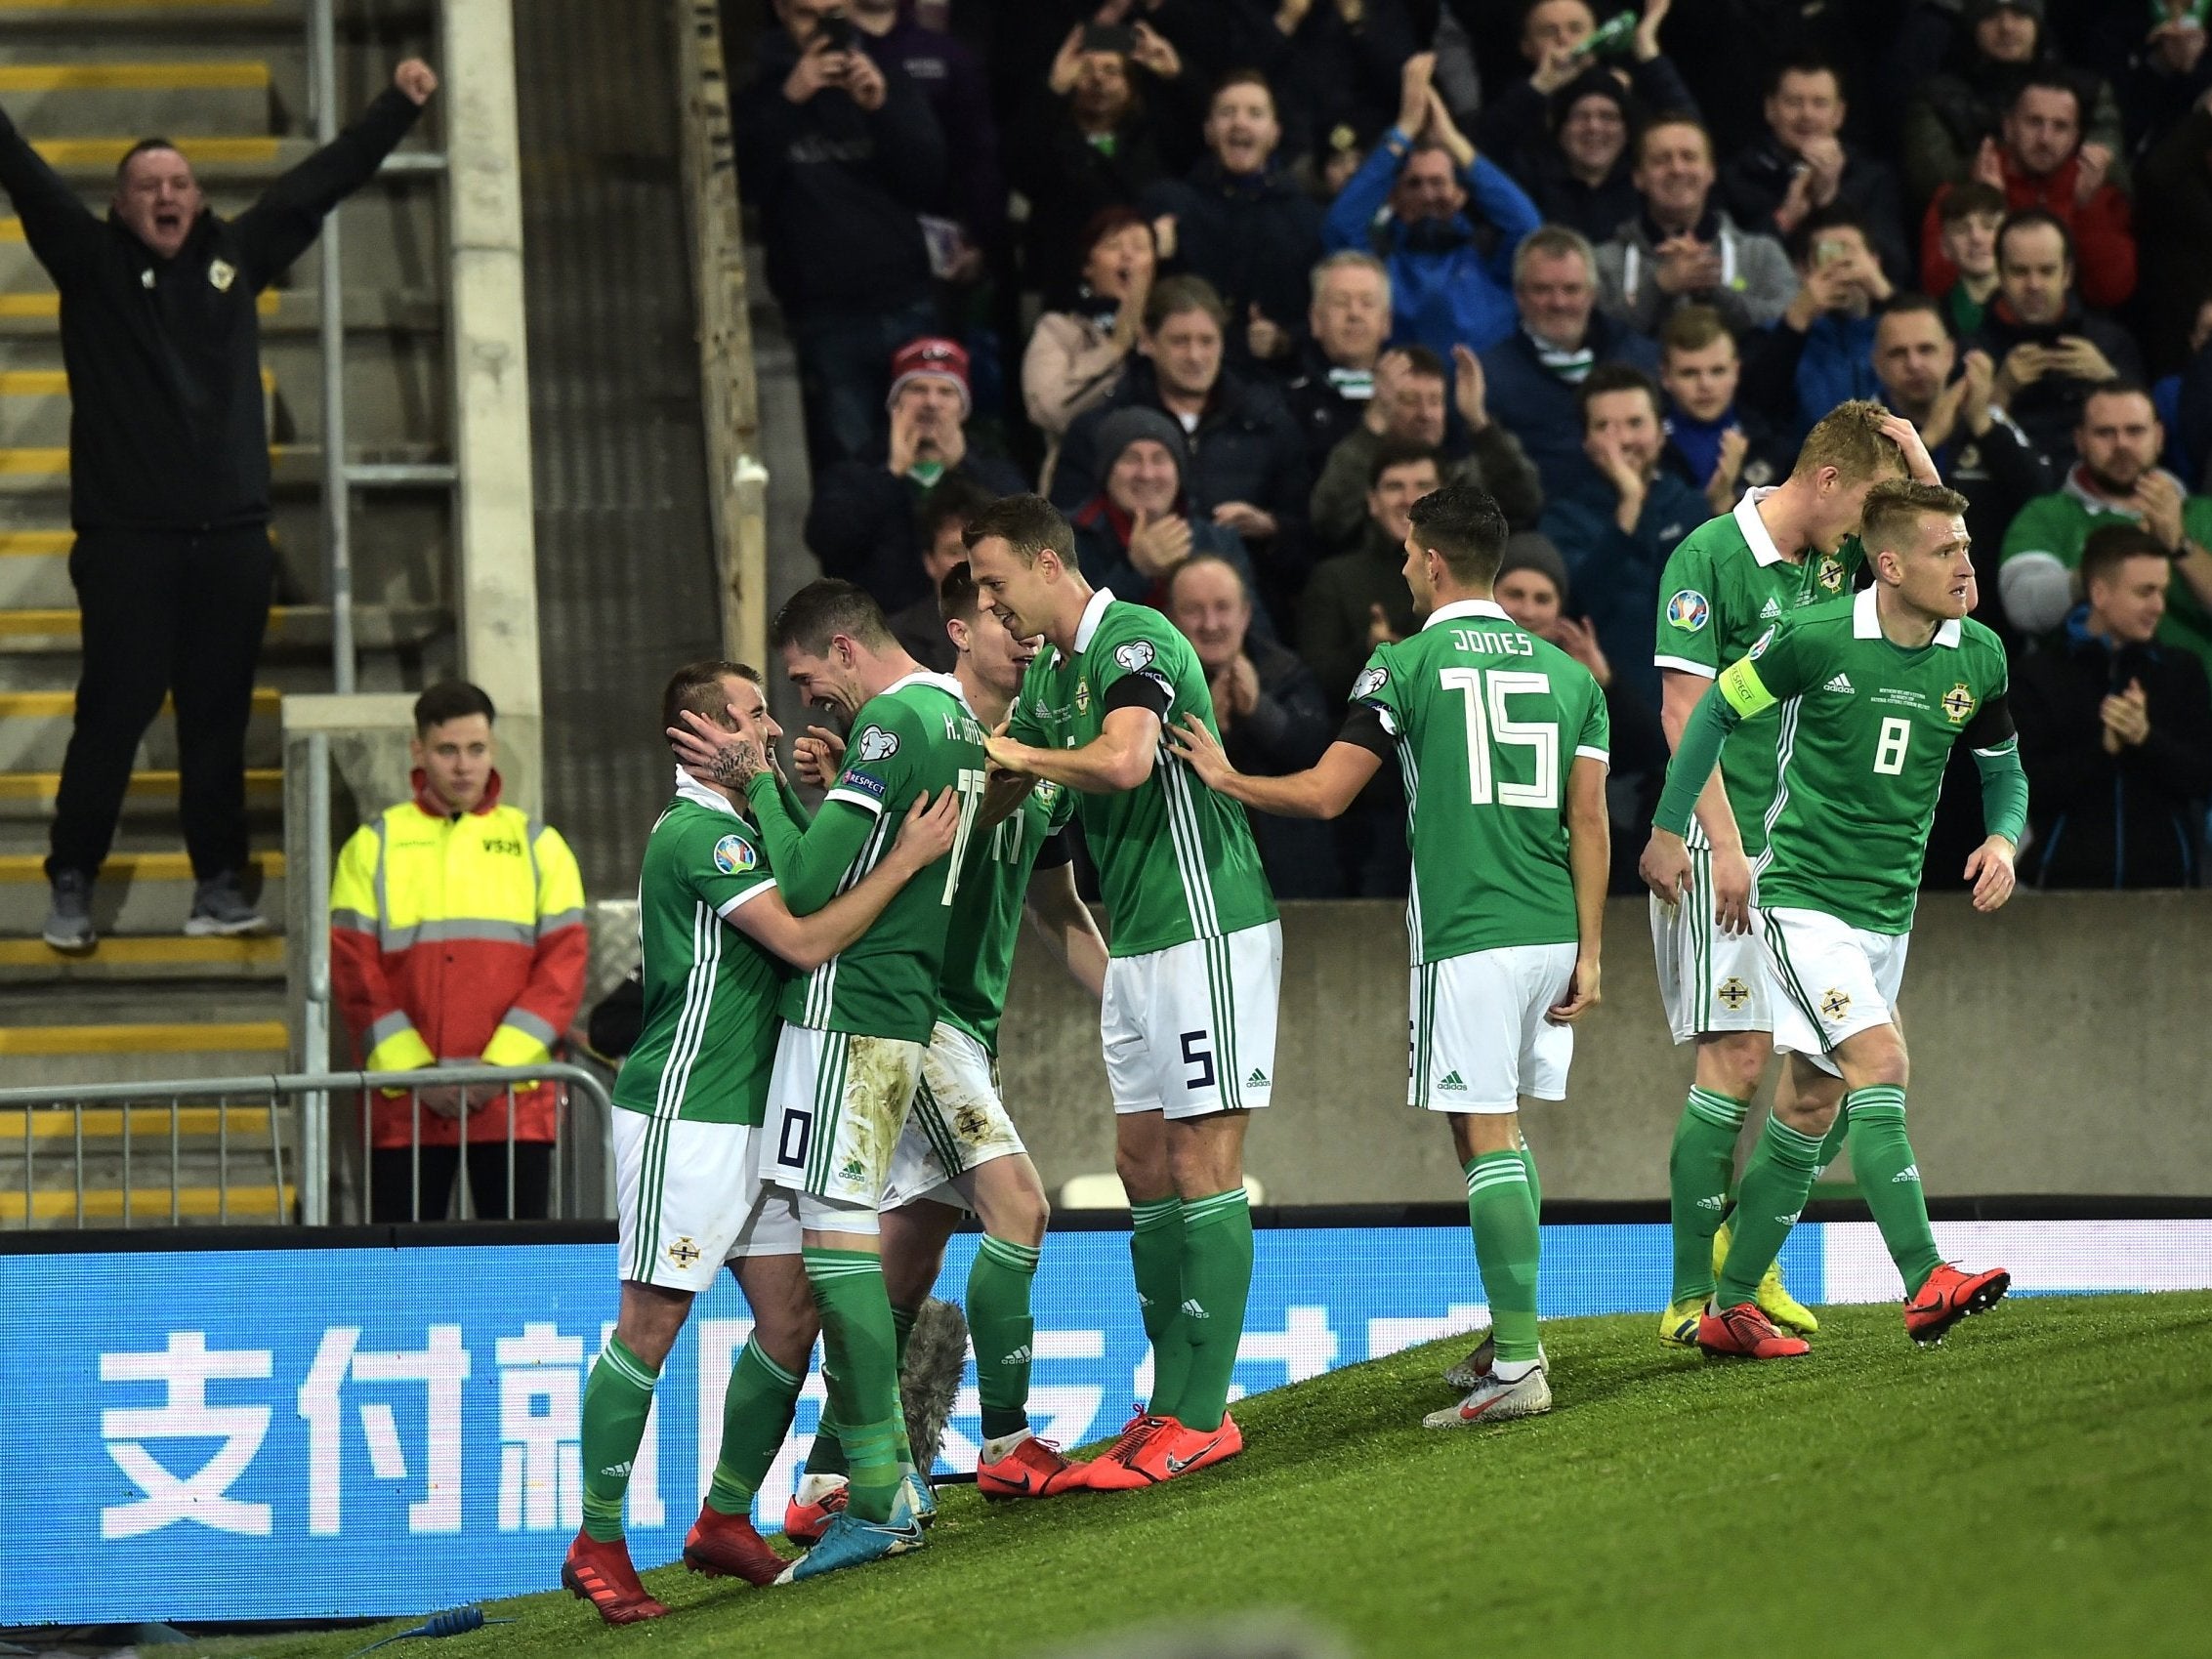 Northern Ireland recorded their first competitive victory since September 2017 last Thursday